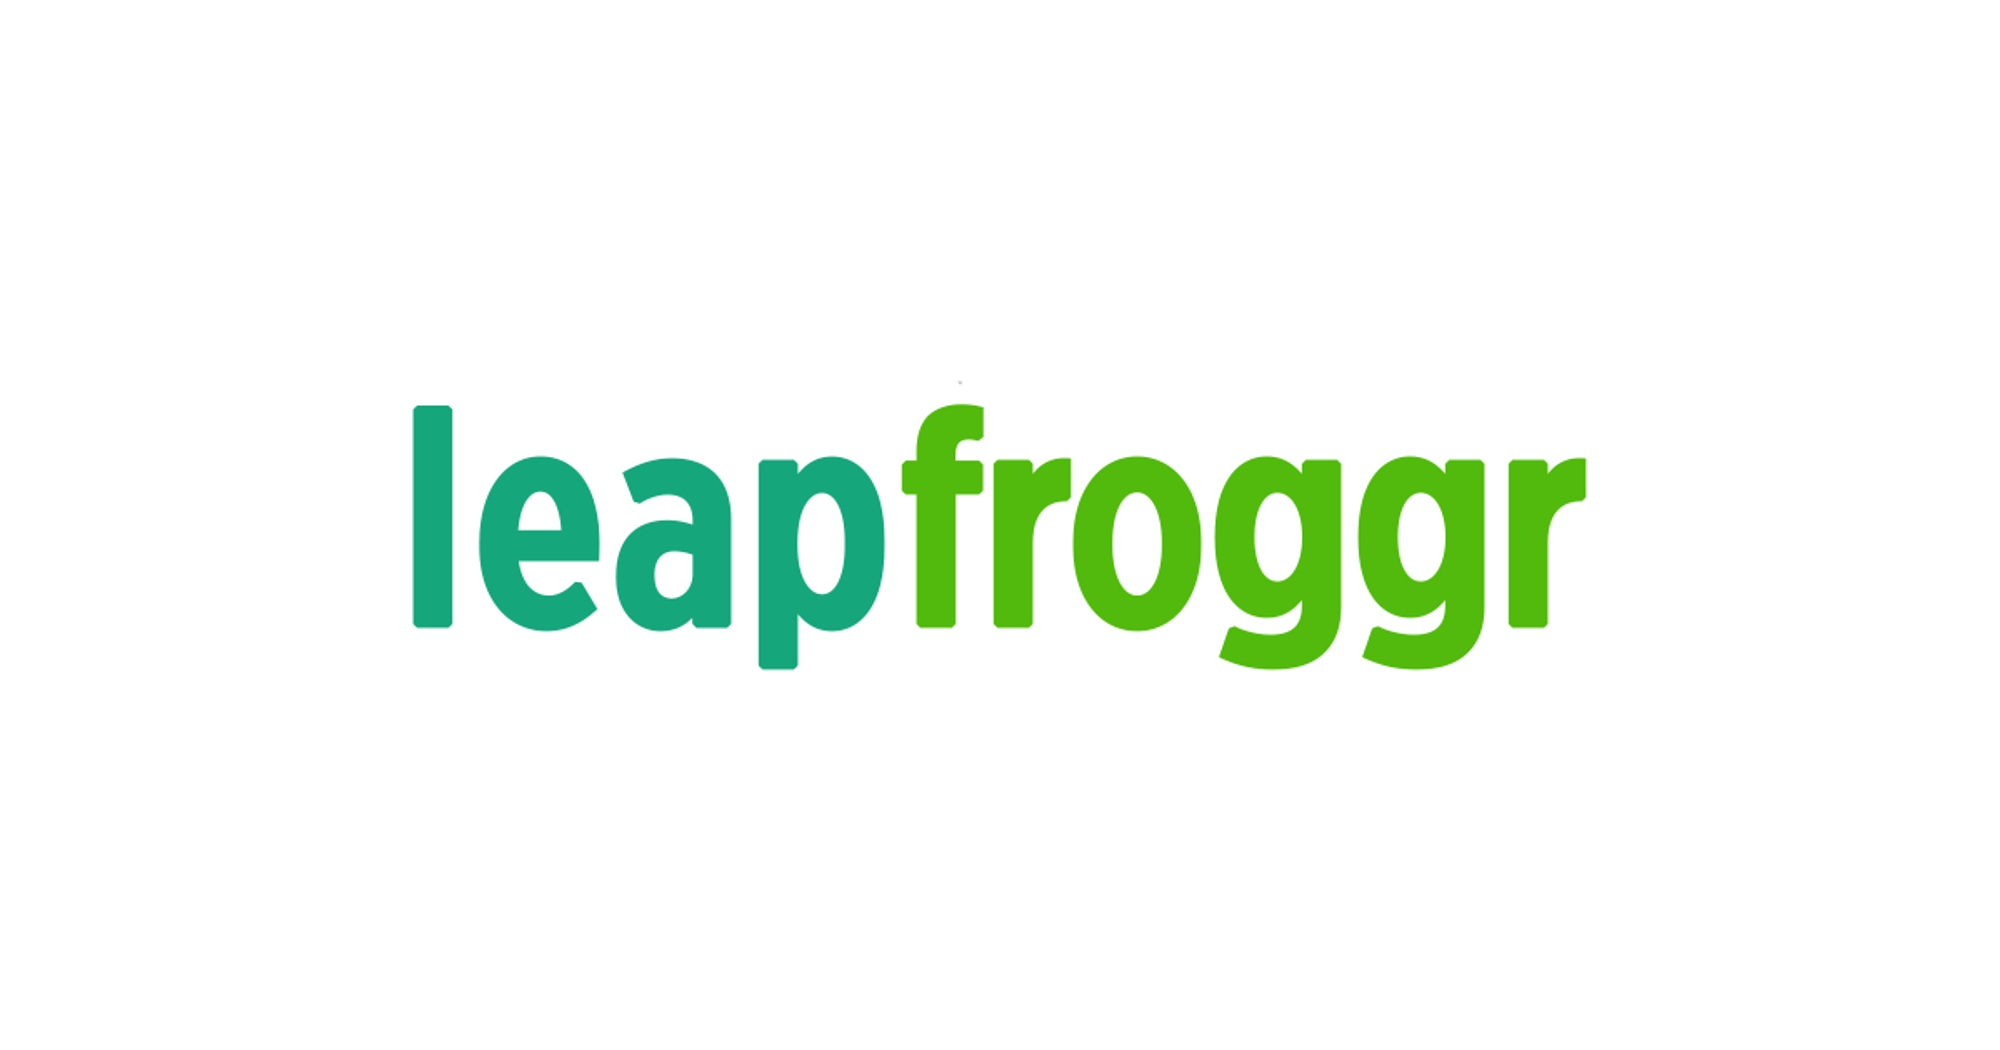 Medical Operations Manager at LeapFroggr Inc.